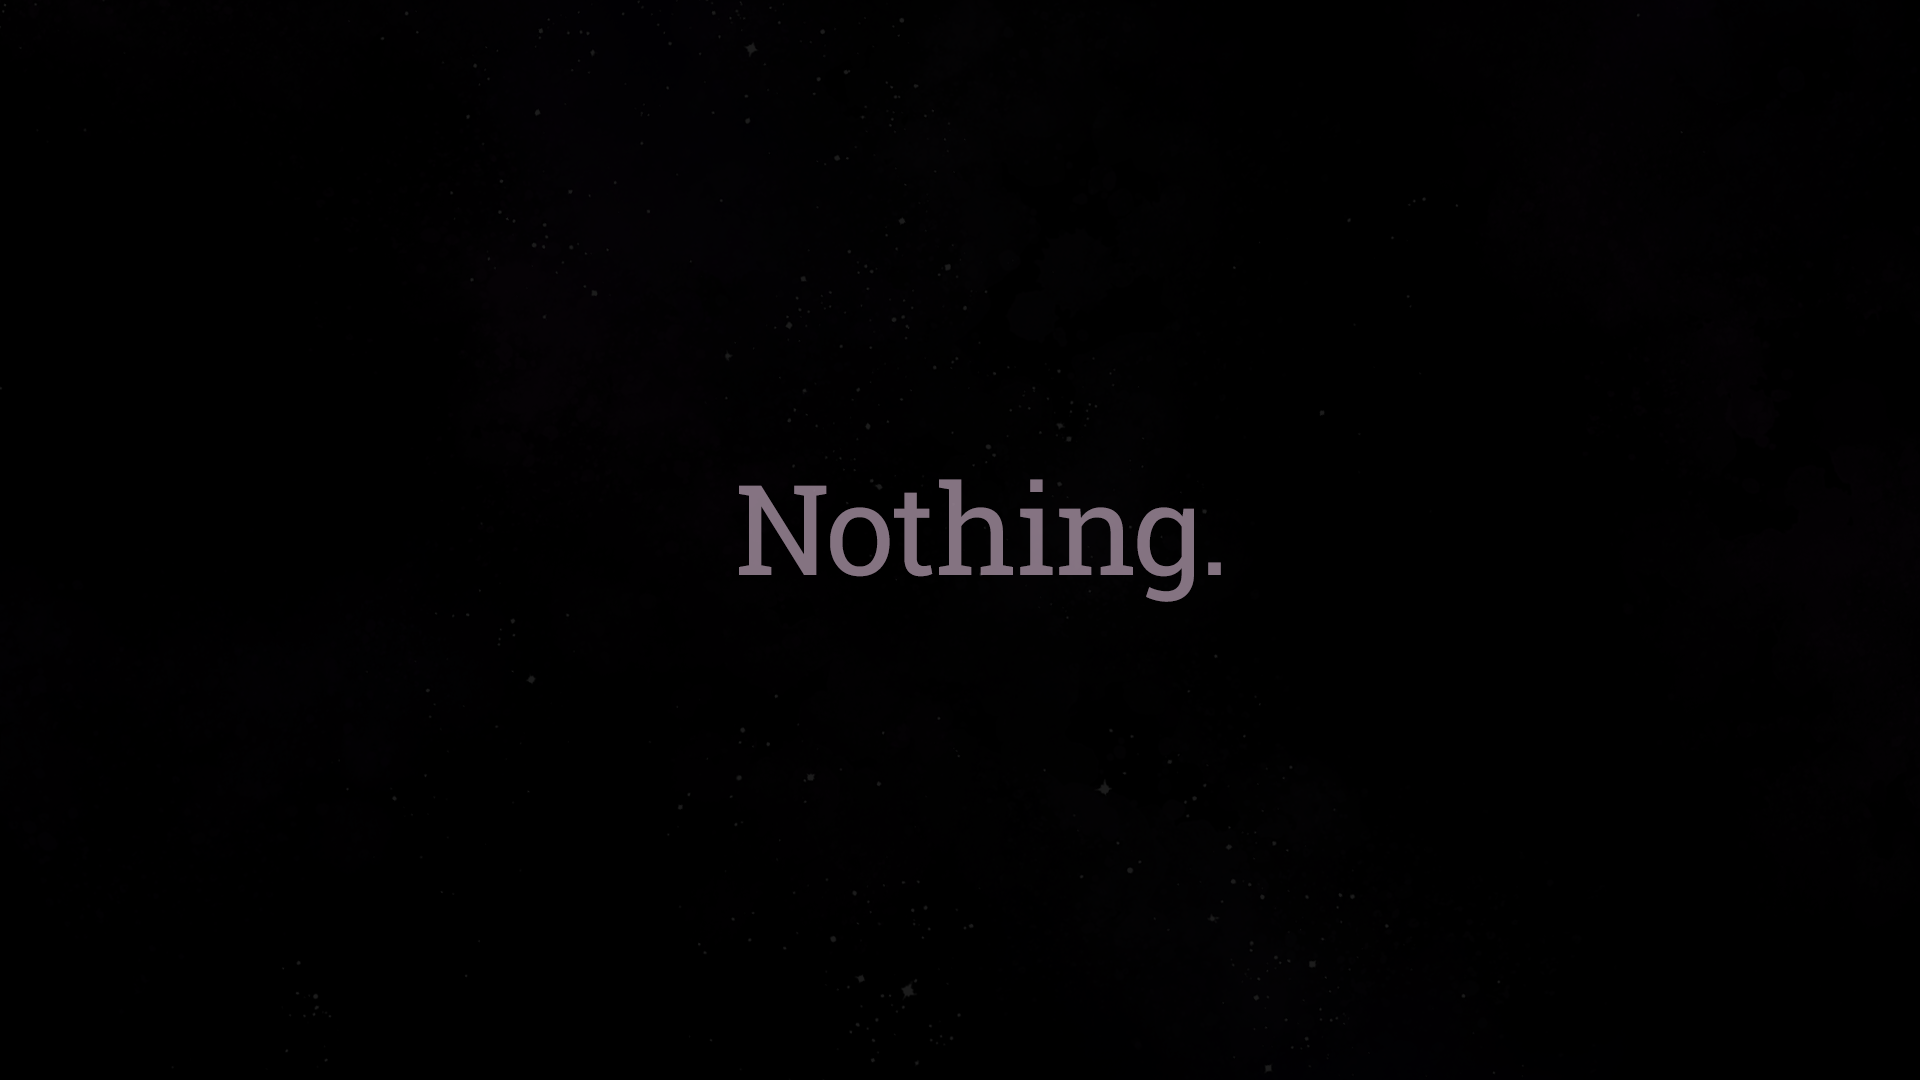 The word "Nothing" on a black field. The text cursor blinks at the end, waiting for you to fill in the blank.